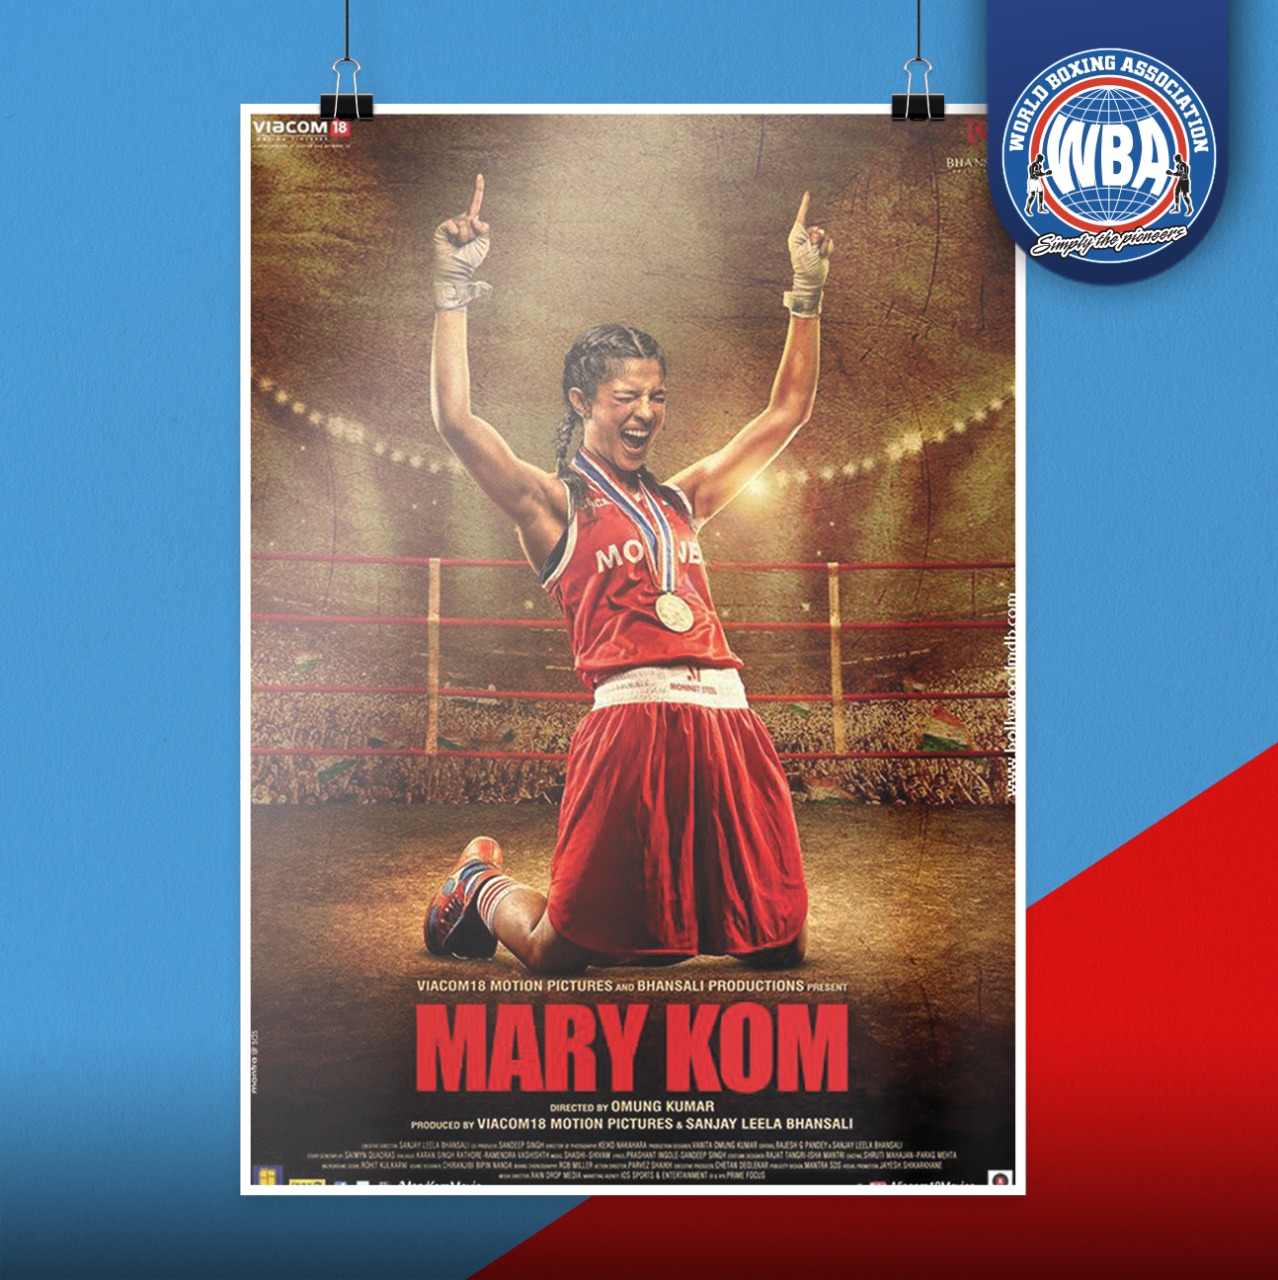 “You Don’t Make History Without War,” Mary Kom